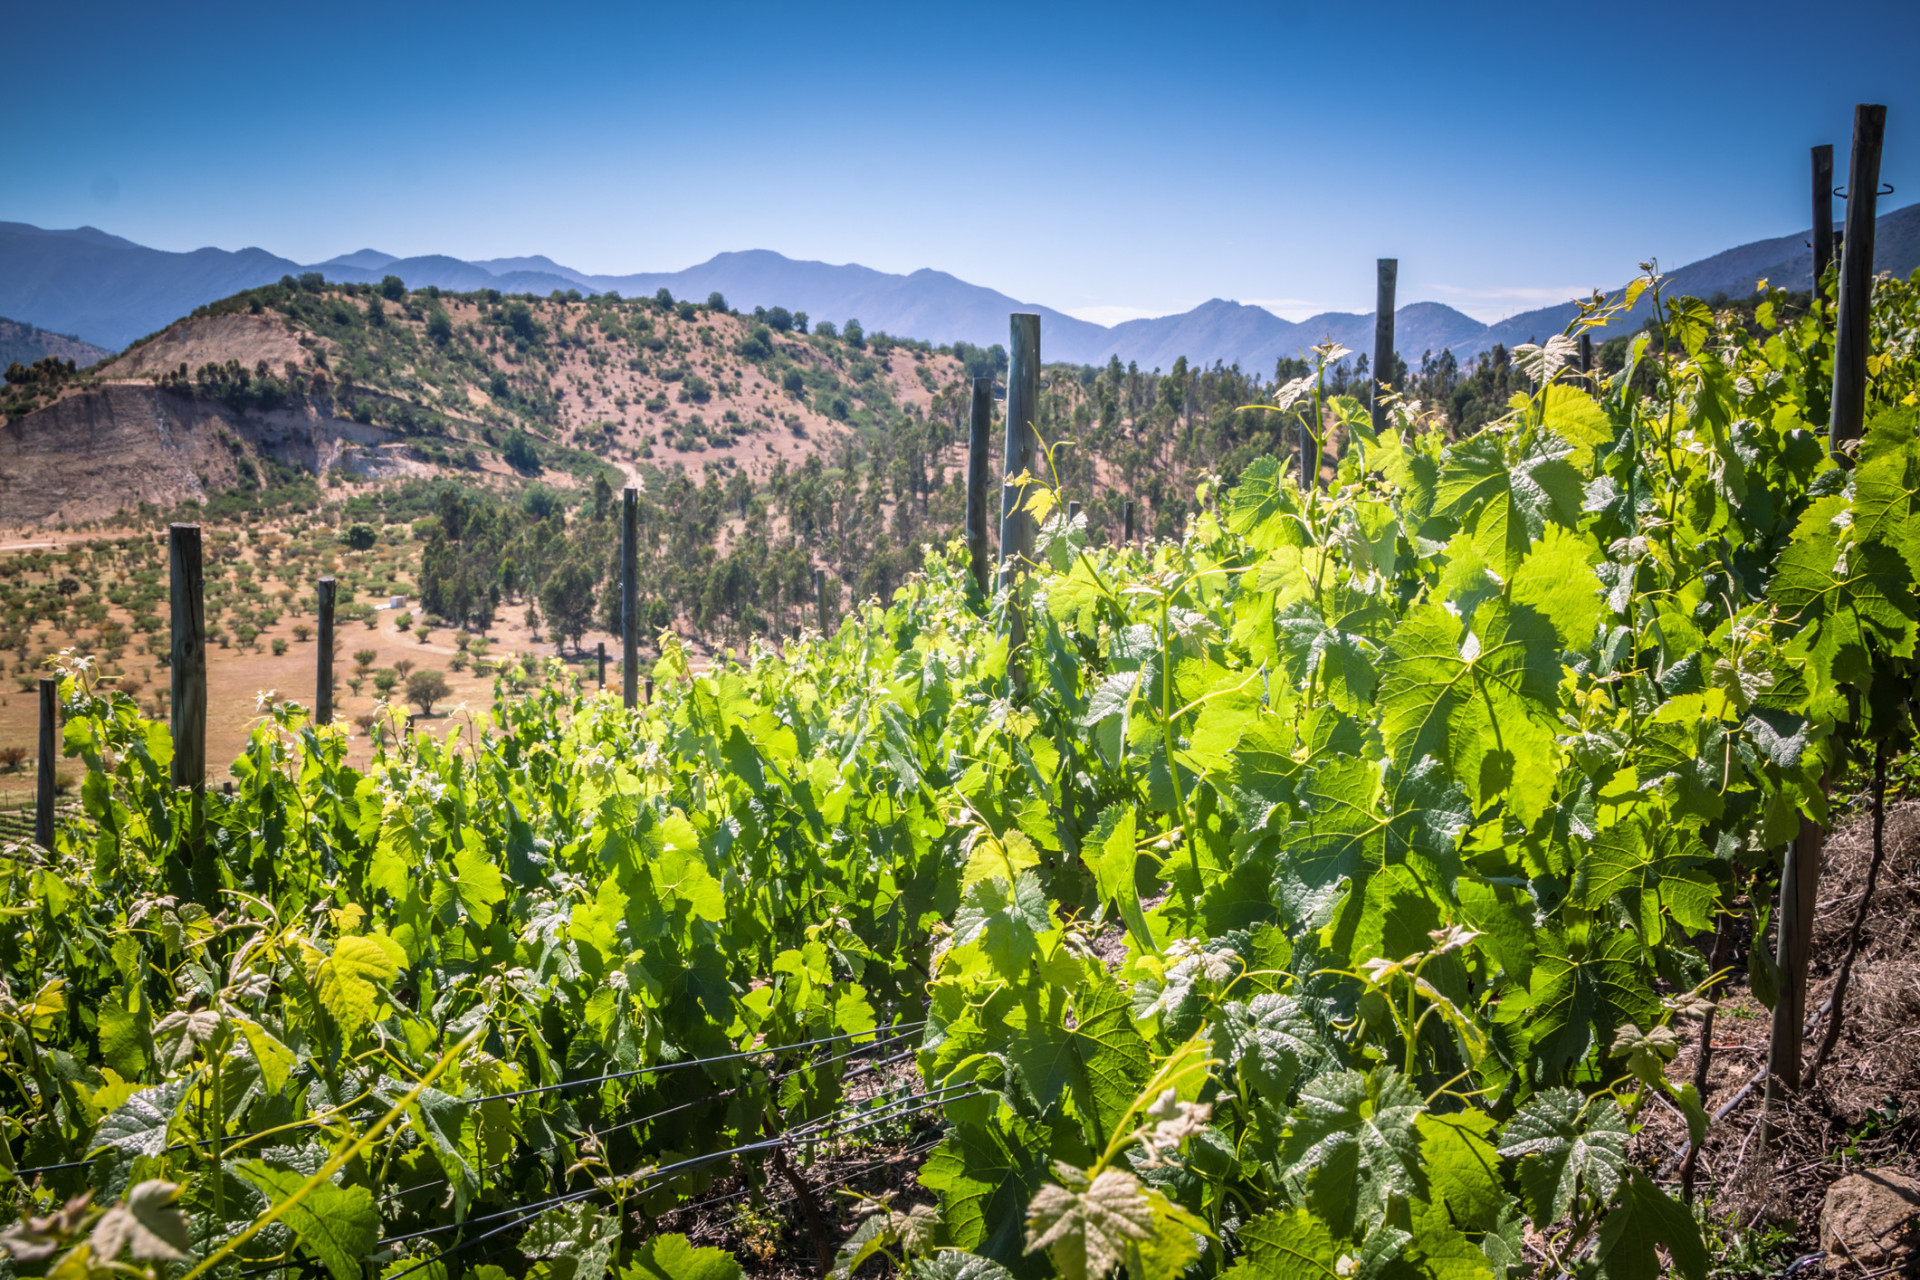 Casablanca Valley's elevated location provides for some interesting cool-climate winemaking. The destination's signature Sauvignon Blanc and Chardonnay are the wines of choice.<p><a href="https://www.msn.com/en-us/community/channel/vid-7xx8mnucu55yw63we9va2gwr7uihbxwc68fxqp25x6tg4ftibpra?cvid=94631541bc0f4f89bfd59158d696ad7e">Follow us and access great exclusive content every day</a></p>